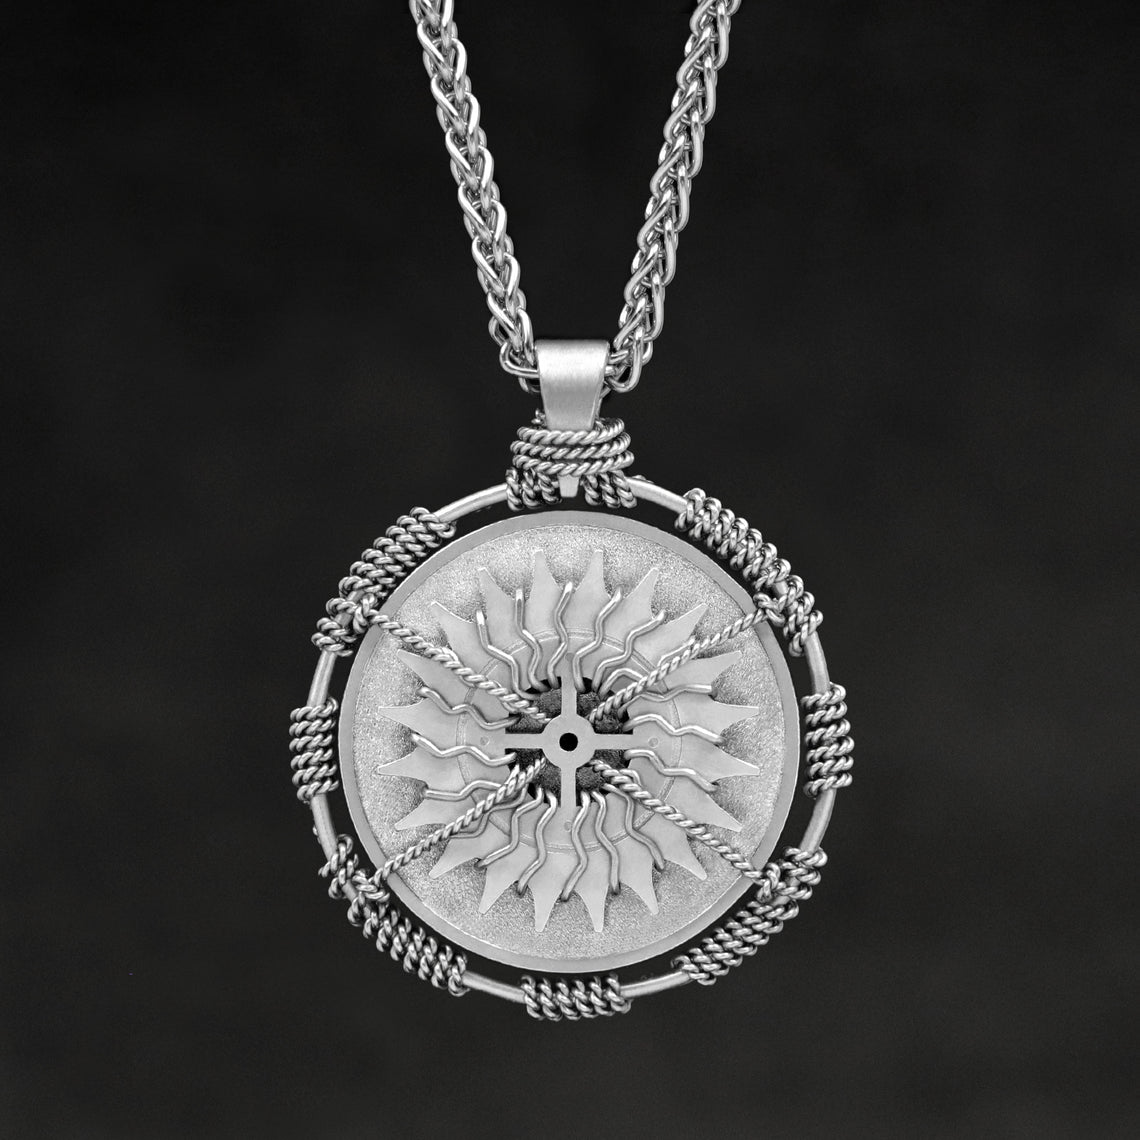 Hanging front view of Platinum 950 Sewn Platinum Metal Compass pendant and chain with endless loop necklace featuring 20 pointed gear by Caps Brothers